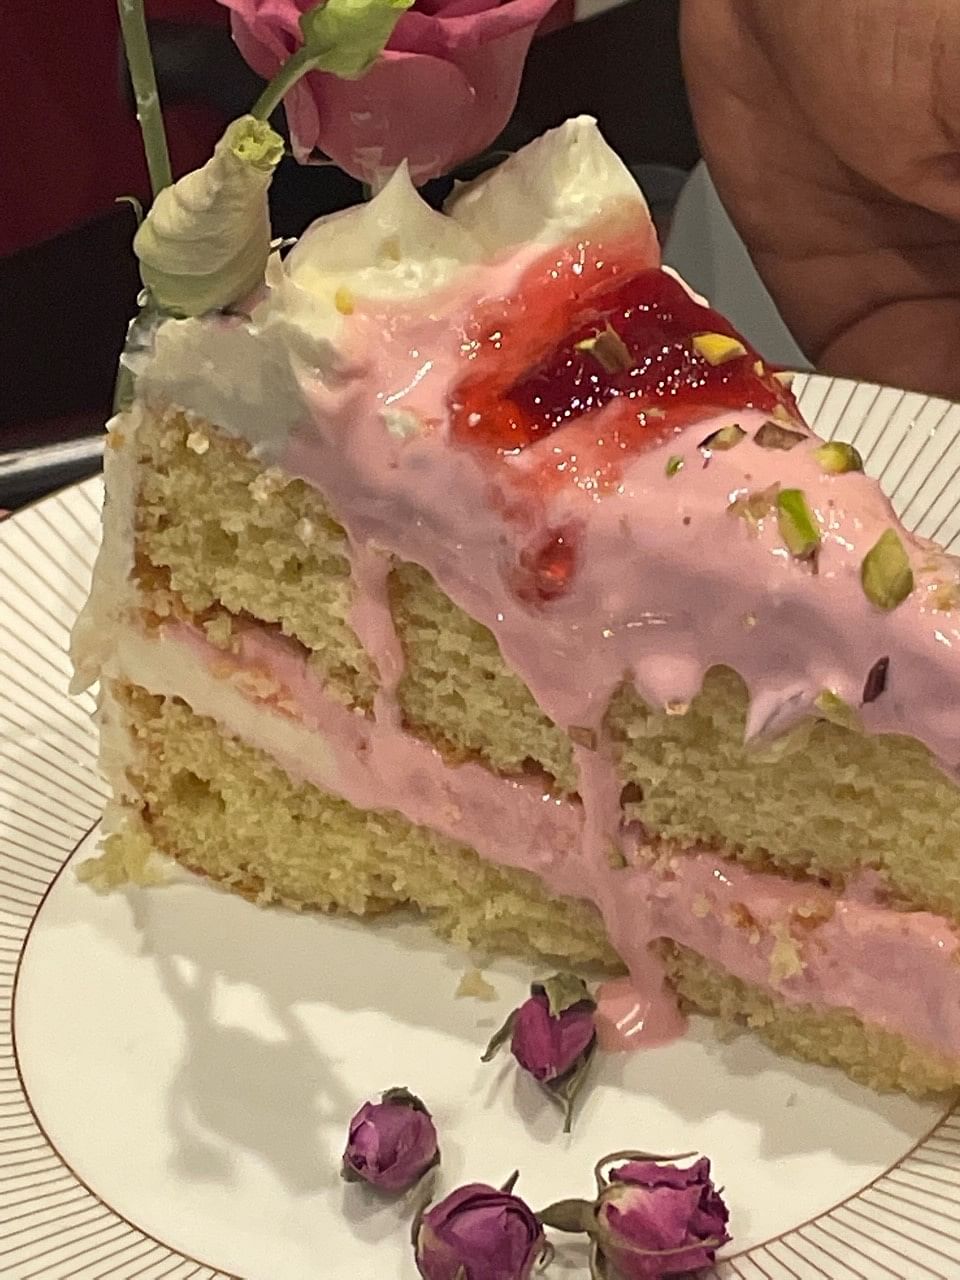 Shabnam Russo on how she made her historic rose falooda cake for Queen Elizabeth's Platinum Jubilee pudding contest.